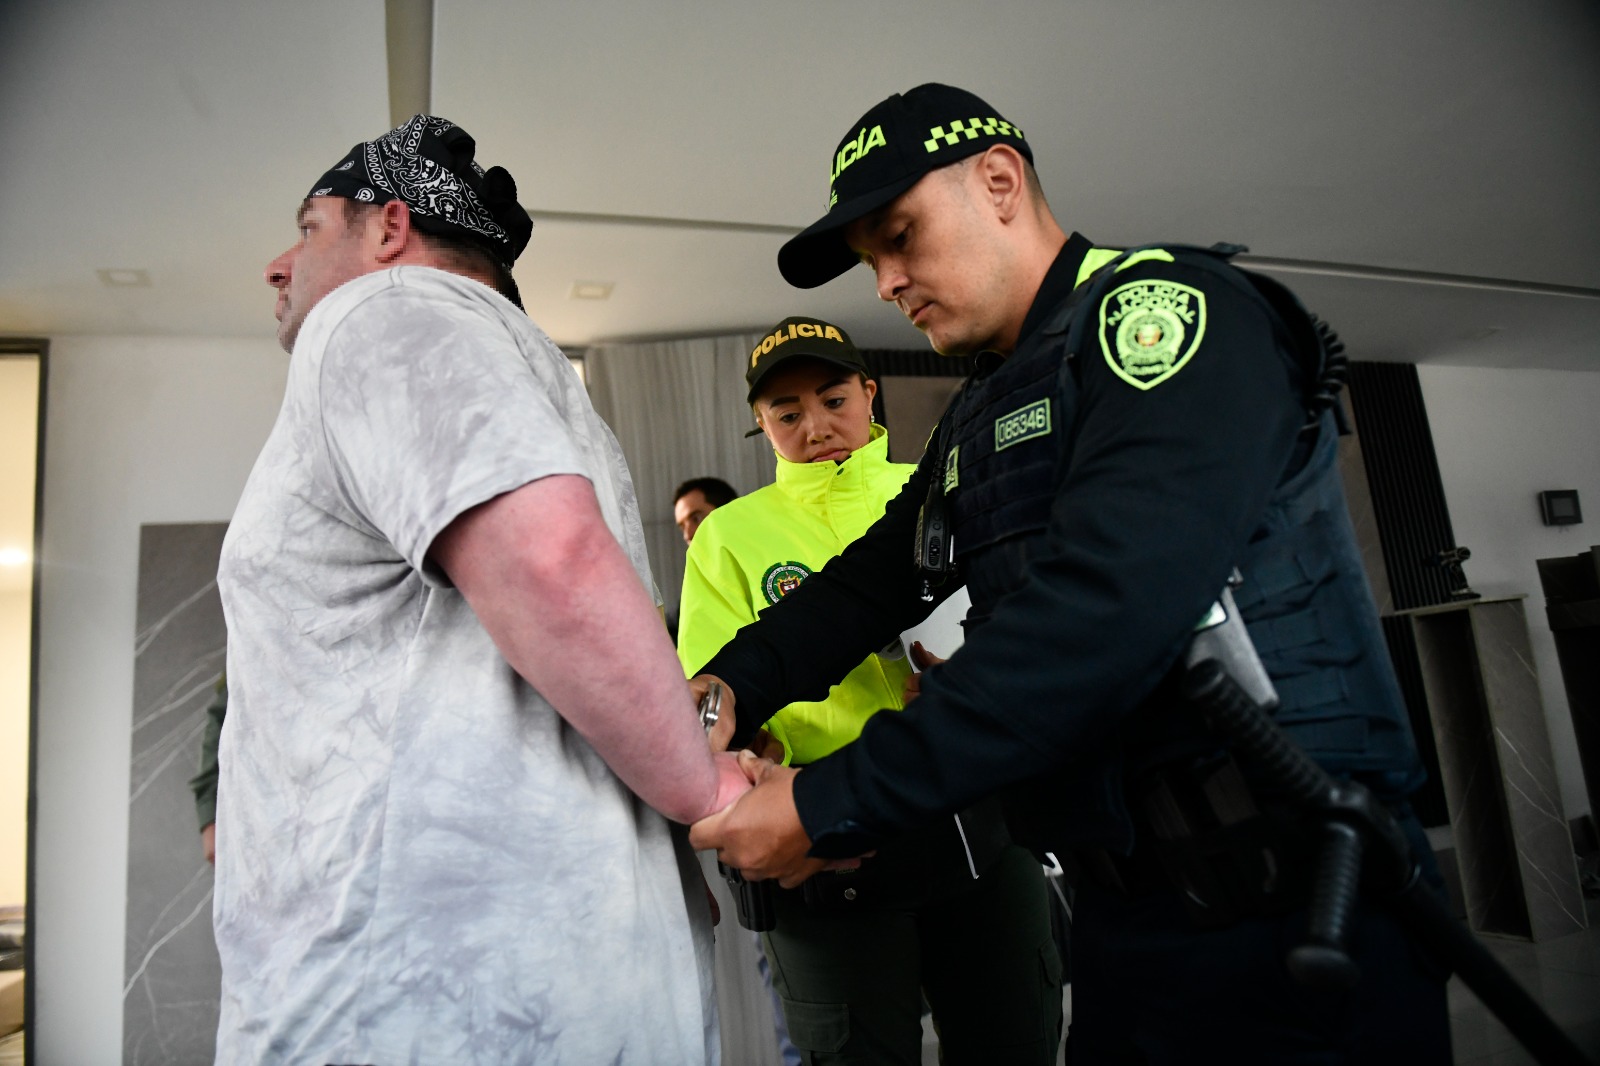 20 foreigners have been captured in Medellin for sexual exploitation